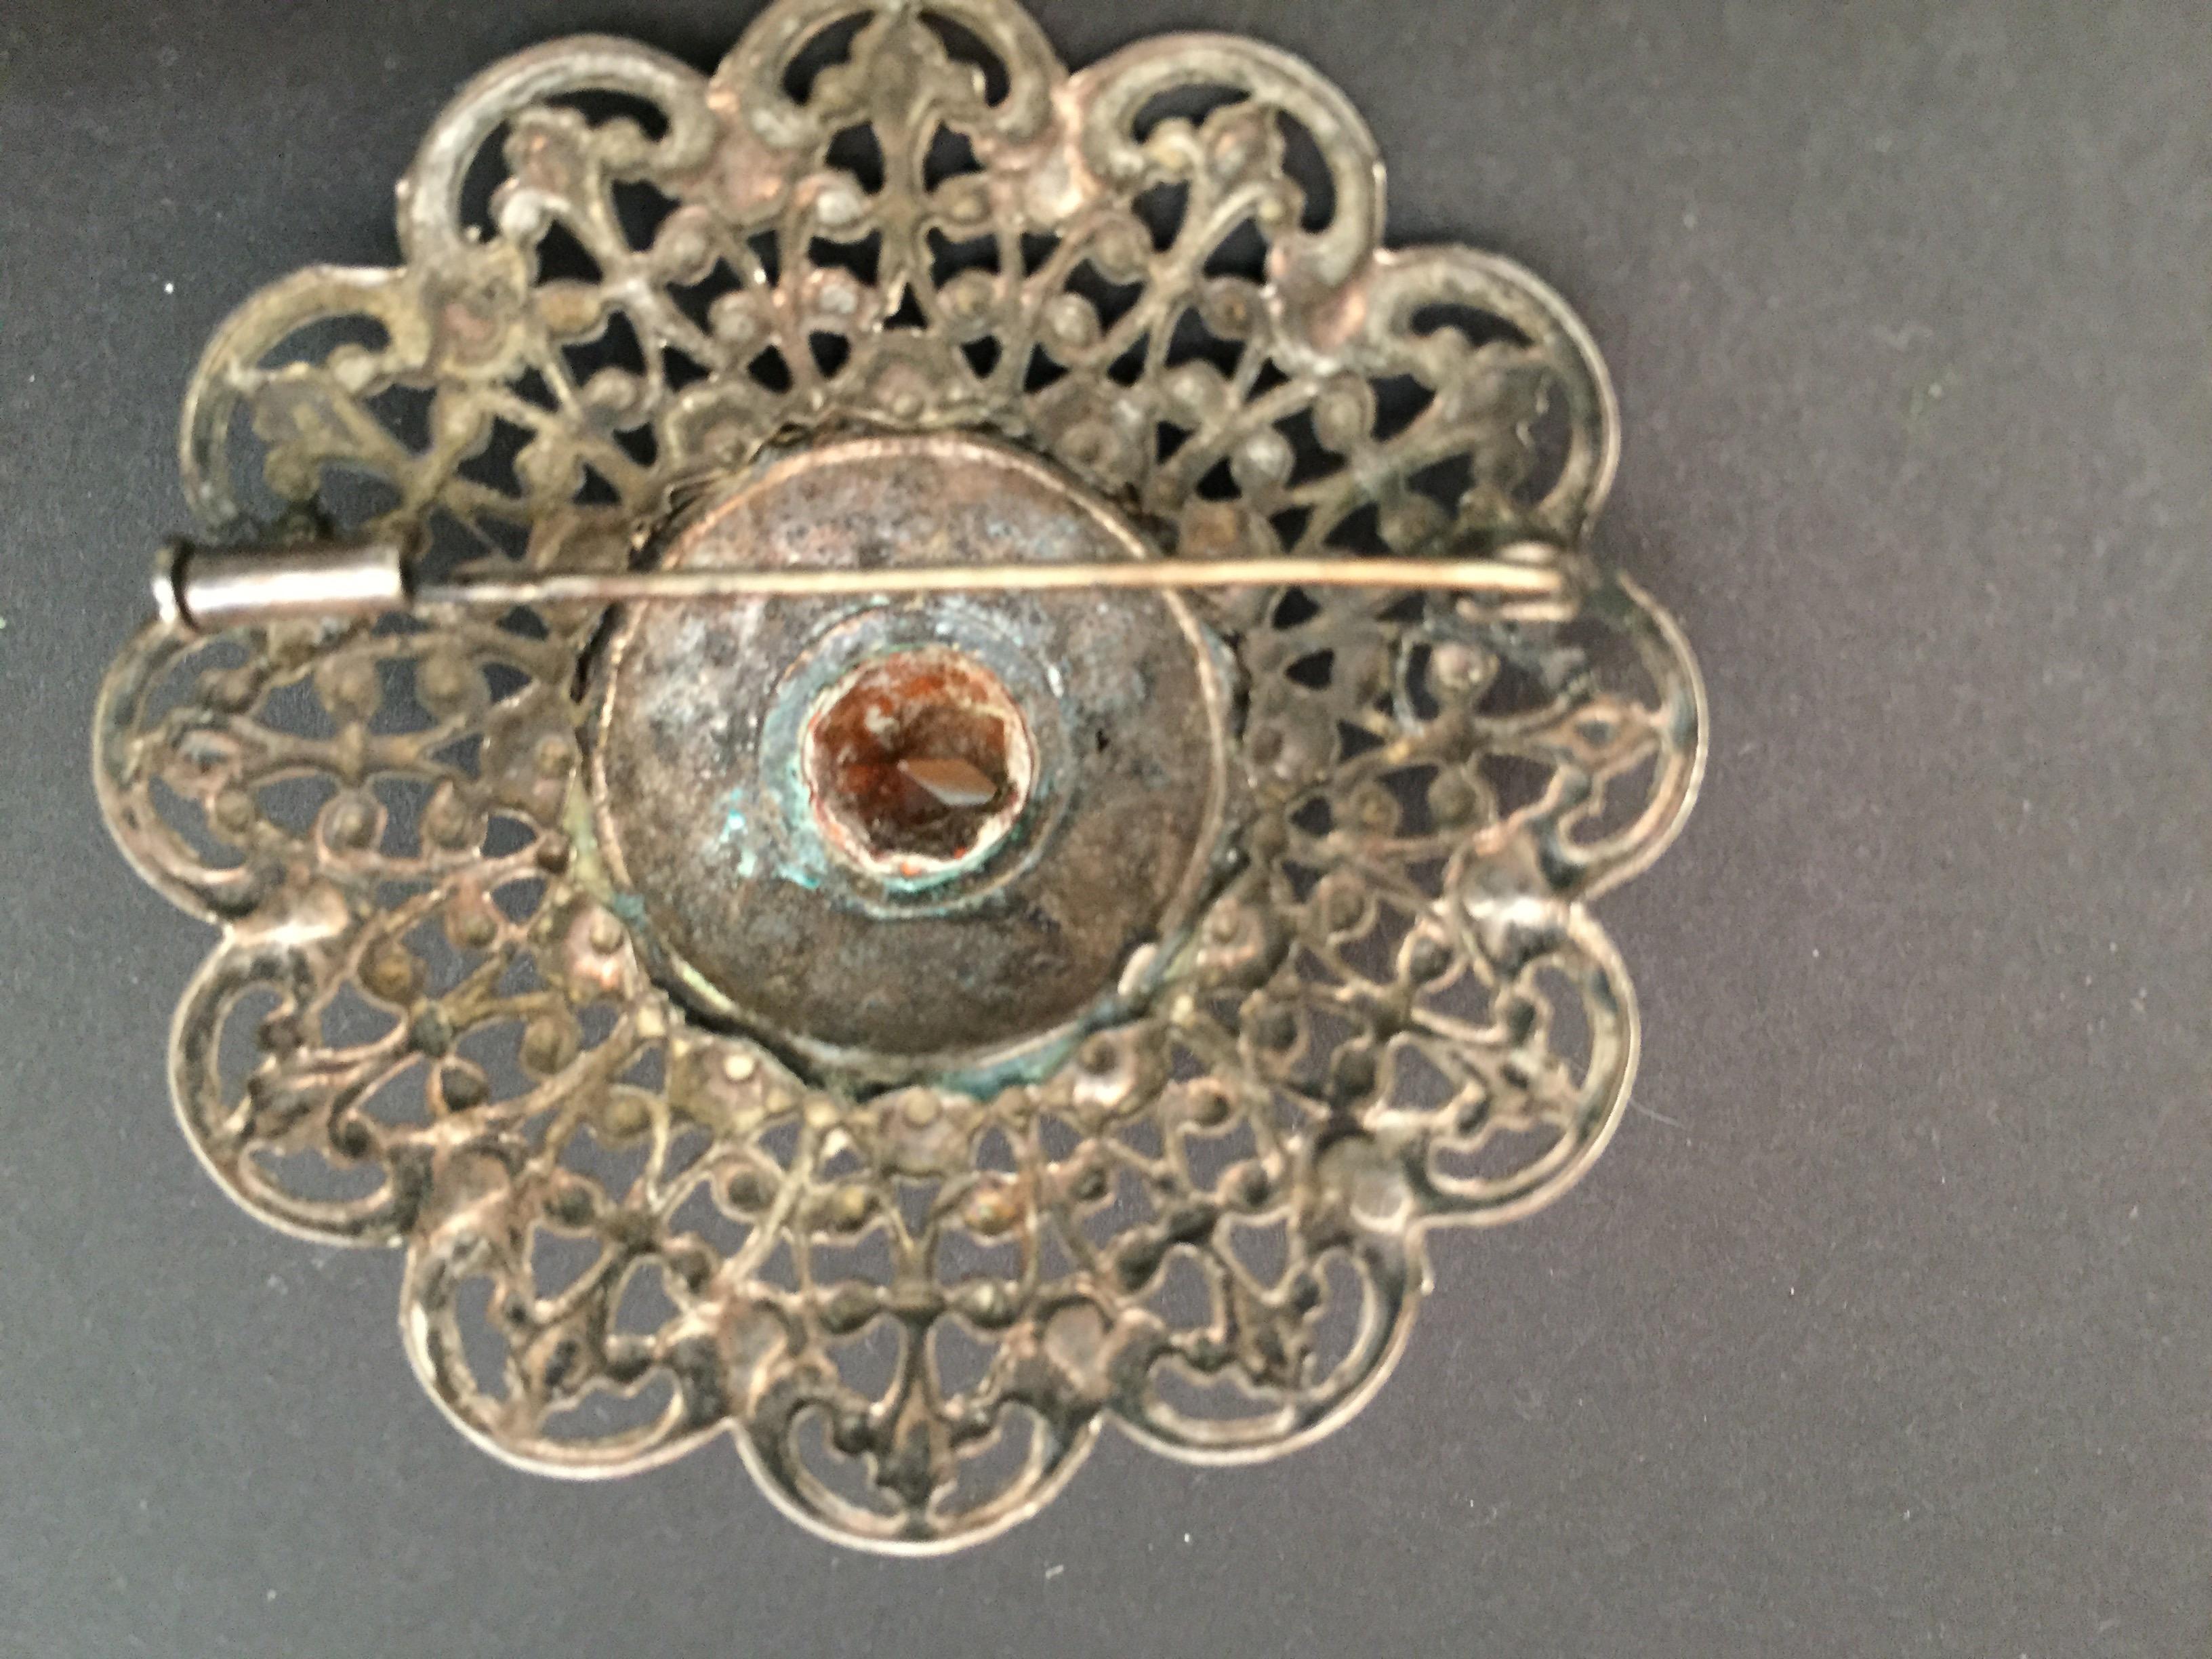 Hand-Crafted Ottoman Style Turkish Silver Brooch or Veil Pin with Moorish Filigree For Sale